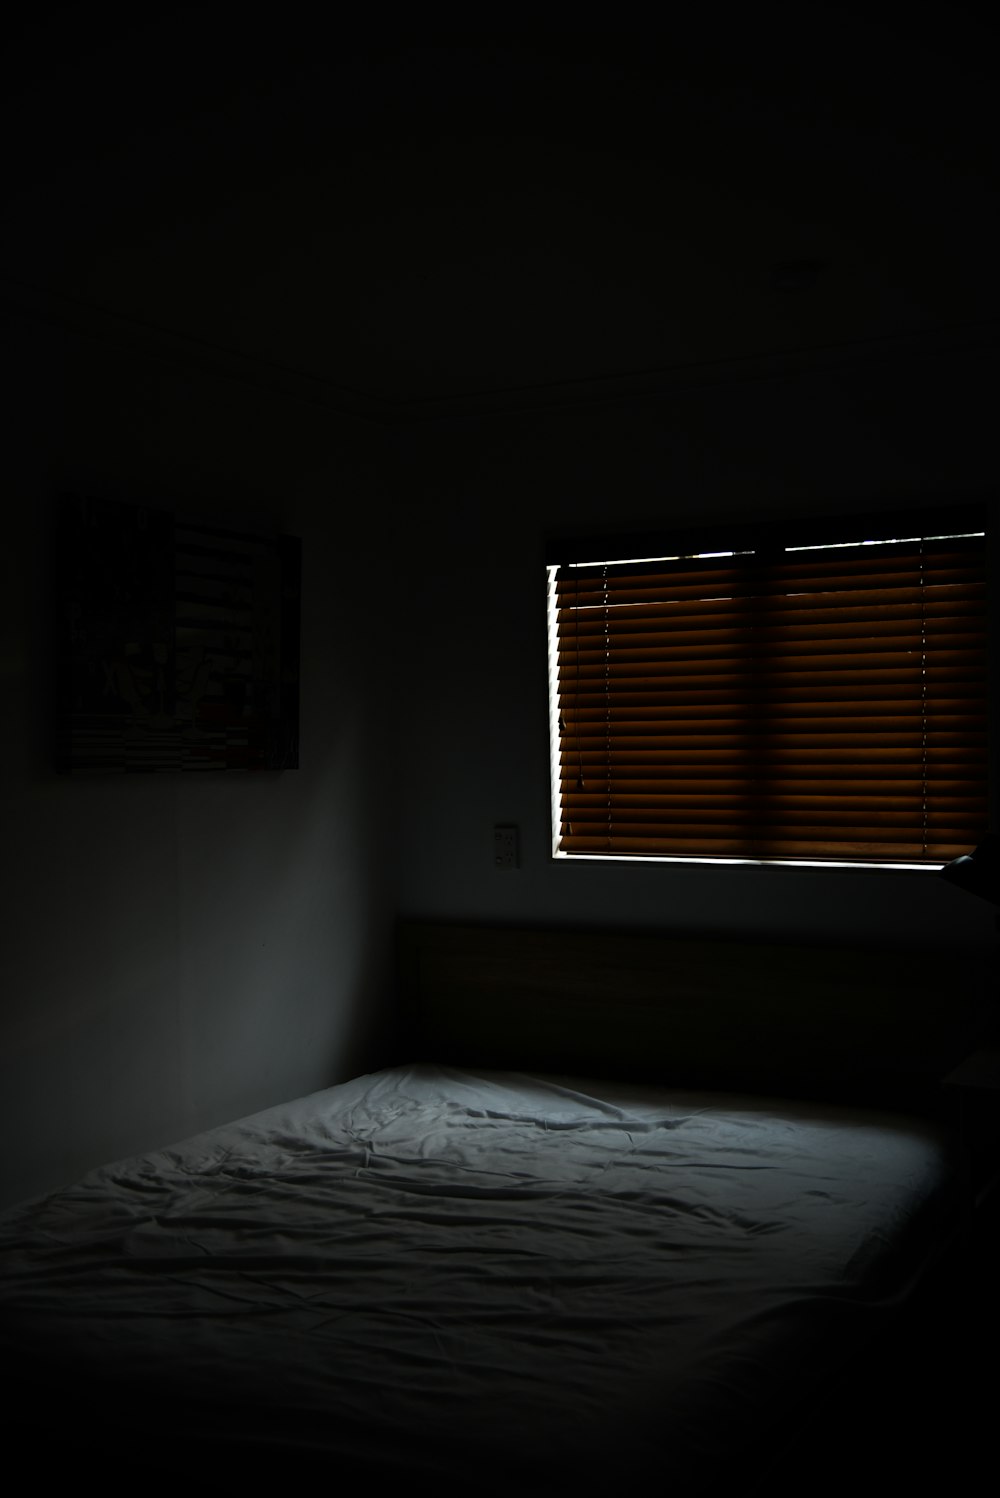 white bed near window with brown window blinds